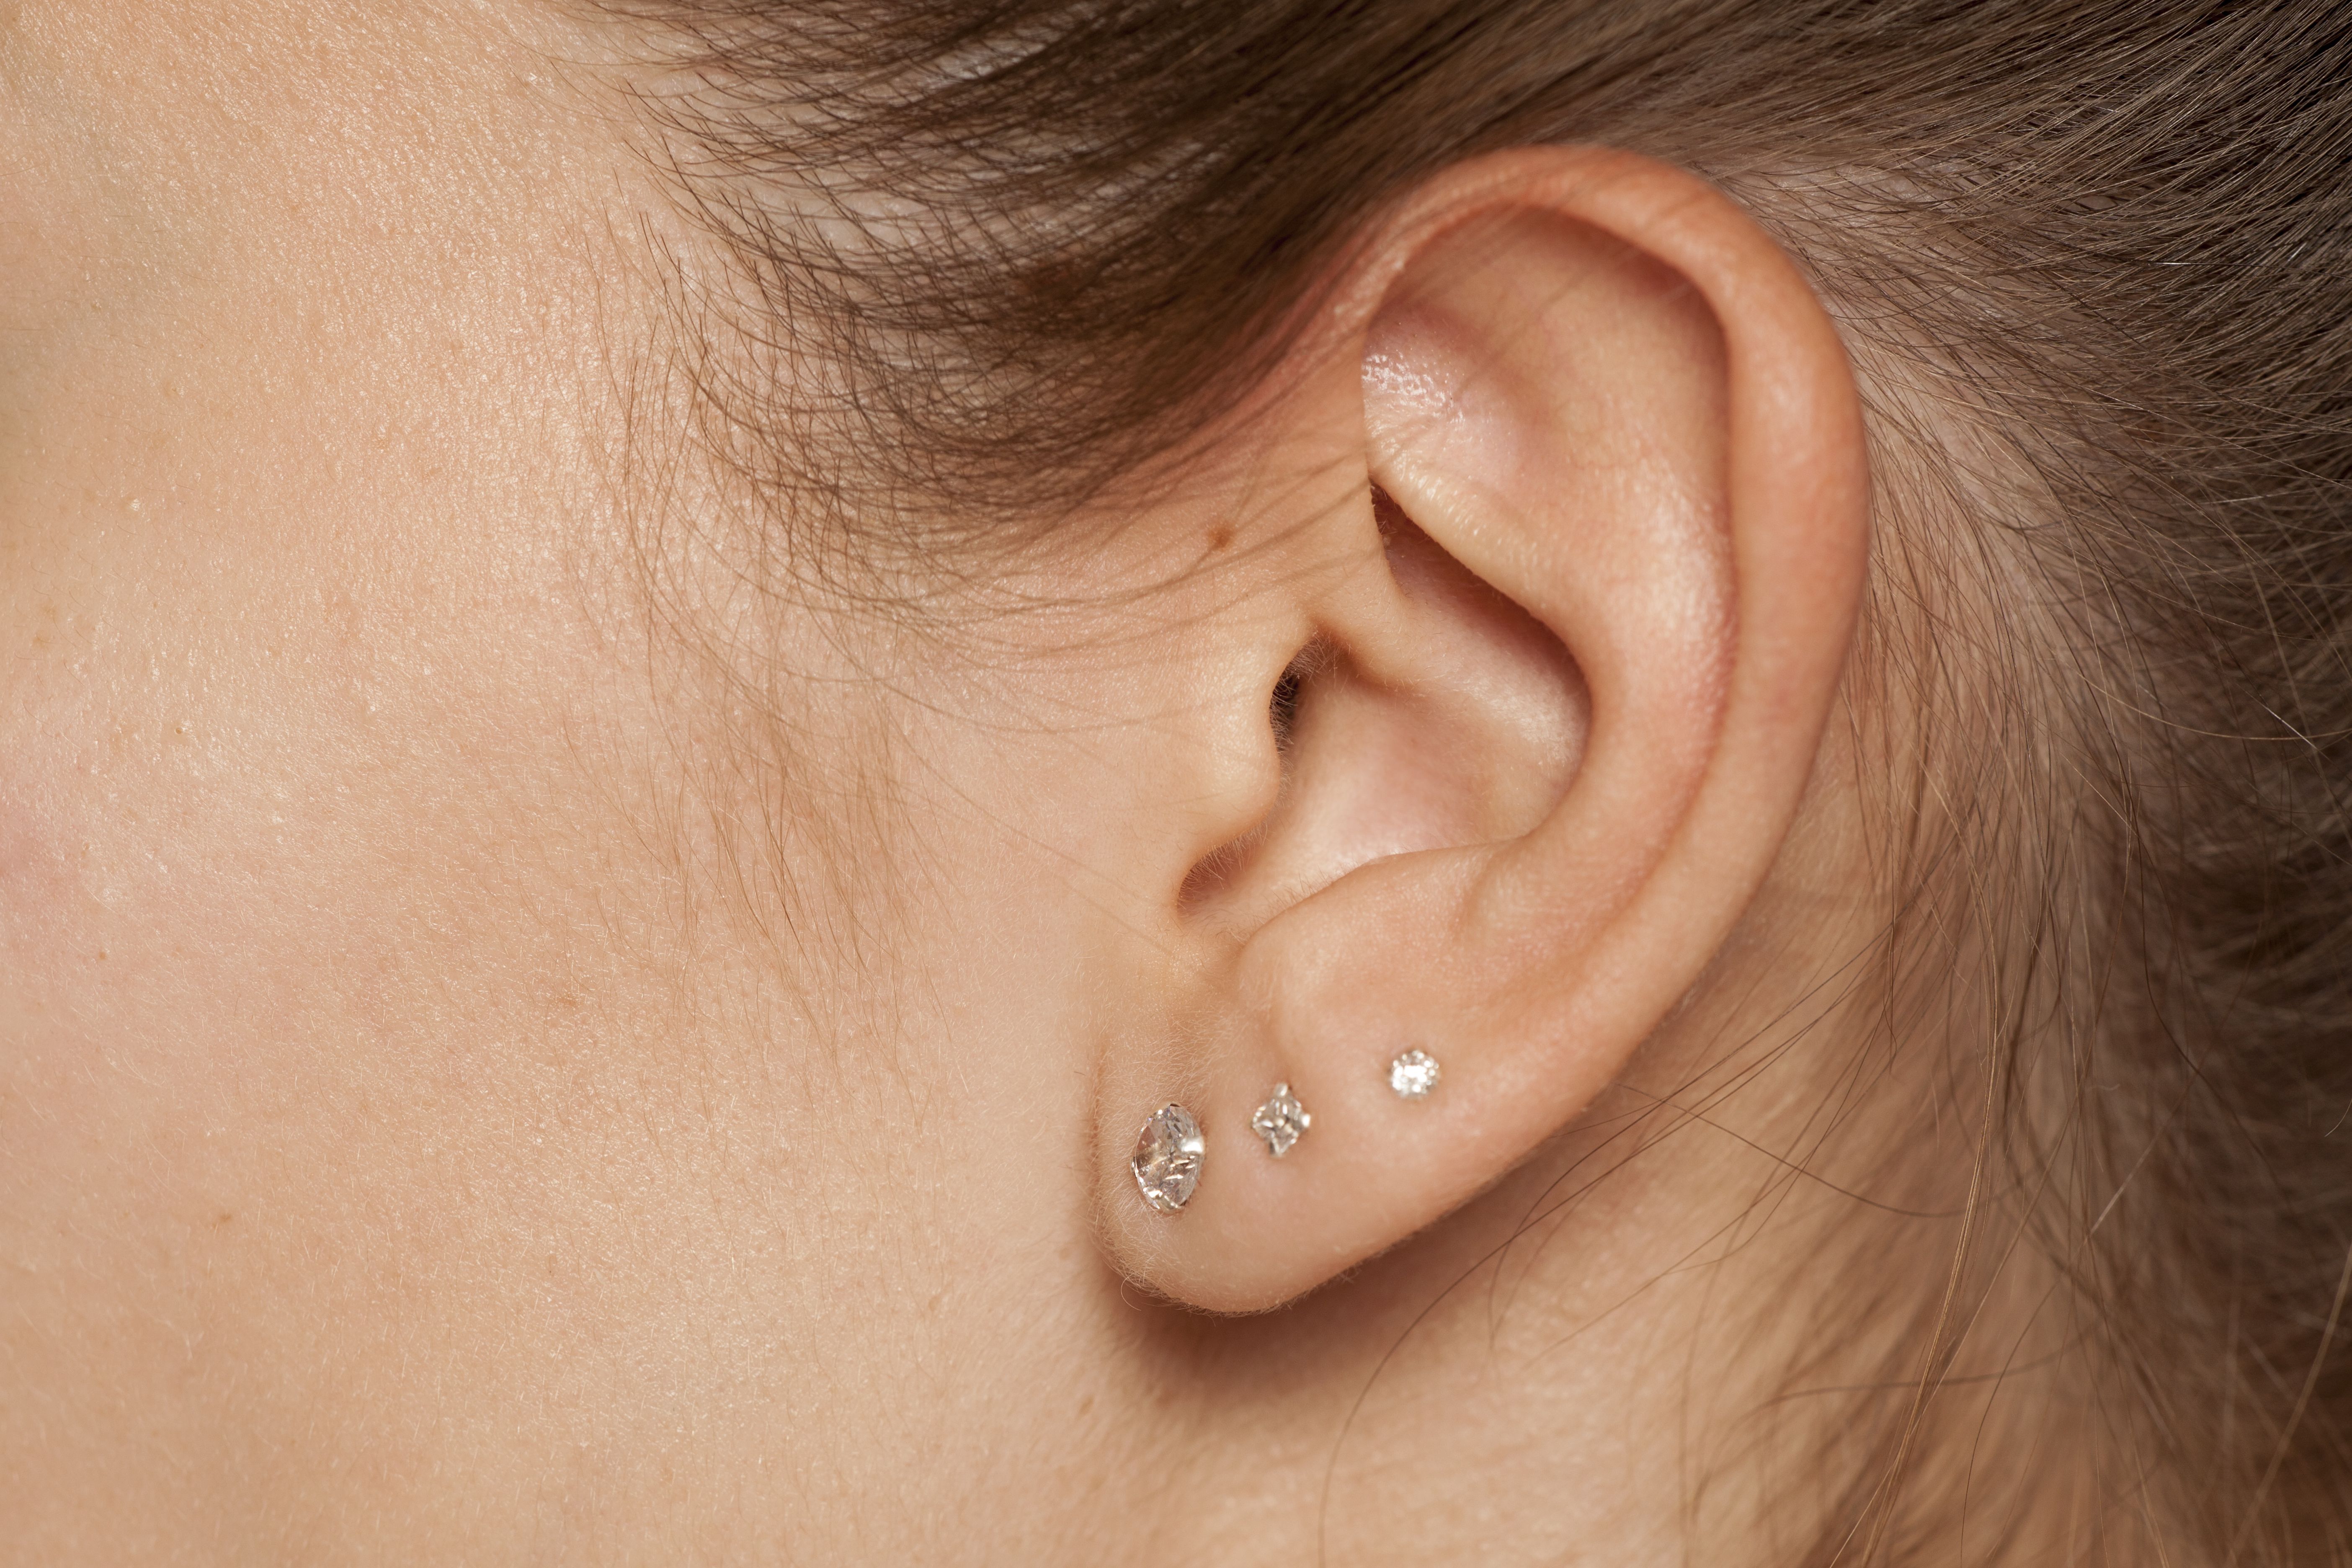 Share 182+ earrings to pierce ears with super hot